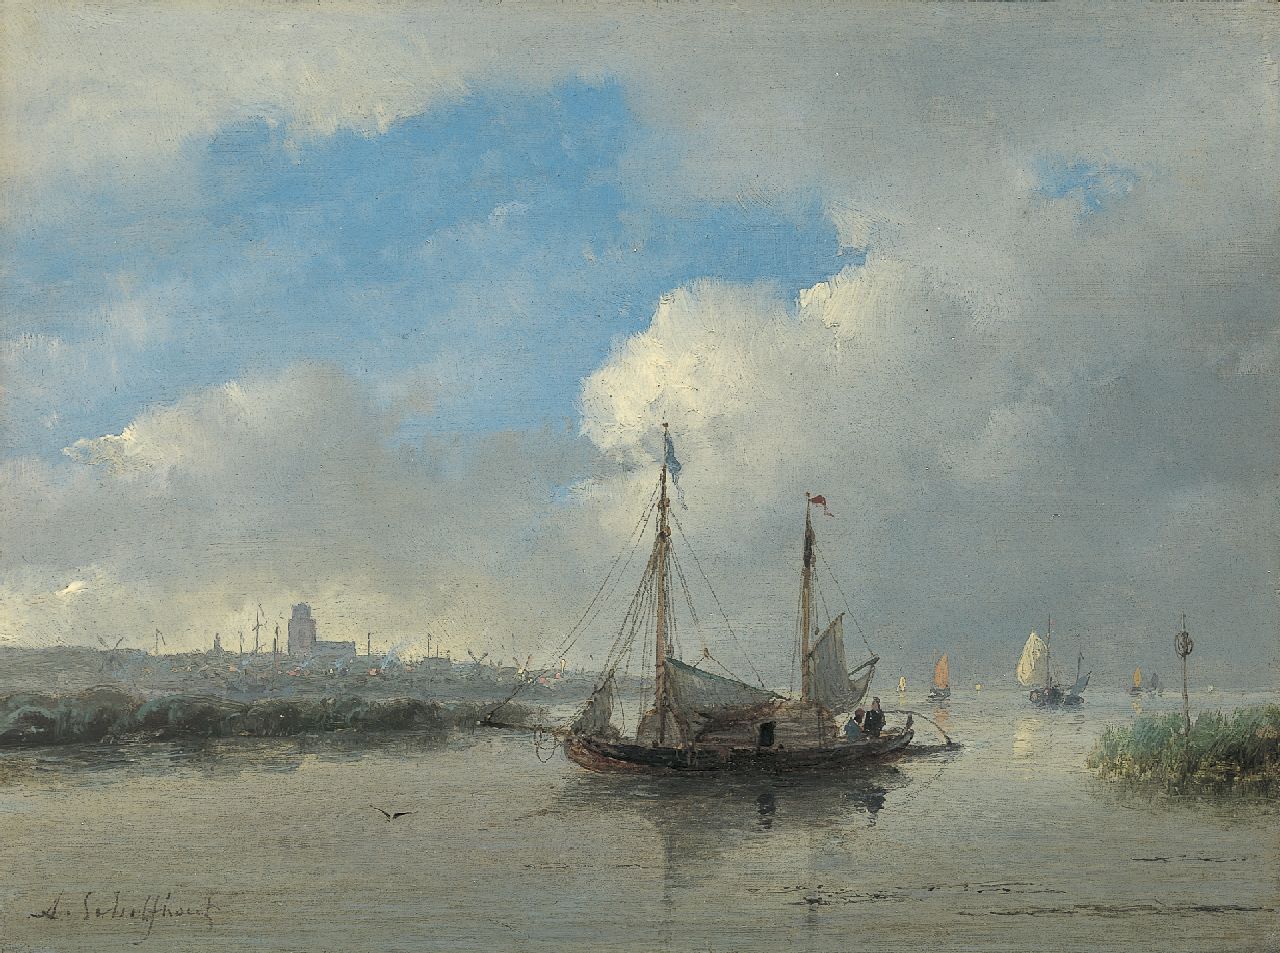 Schelfhout A.  | Andreas Schelfhout, Shipping on the river Merwede, Dordrecht, Öl auf Holz 17,8 x 24,0 cm, signed l.l.